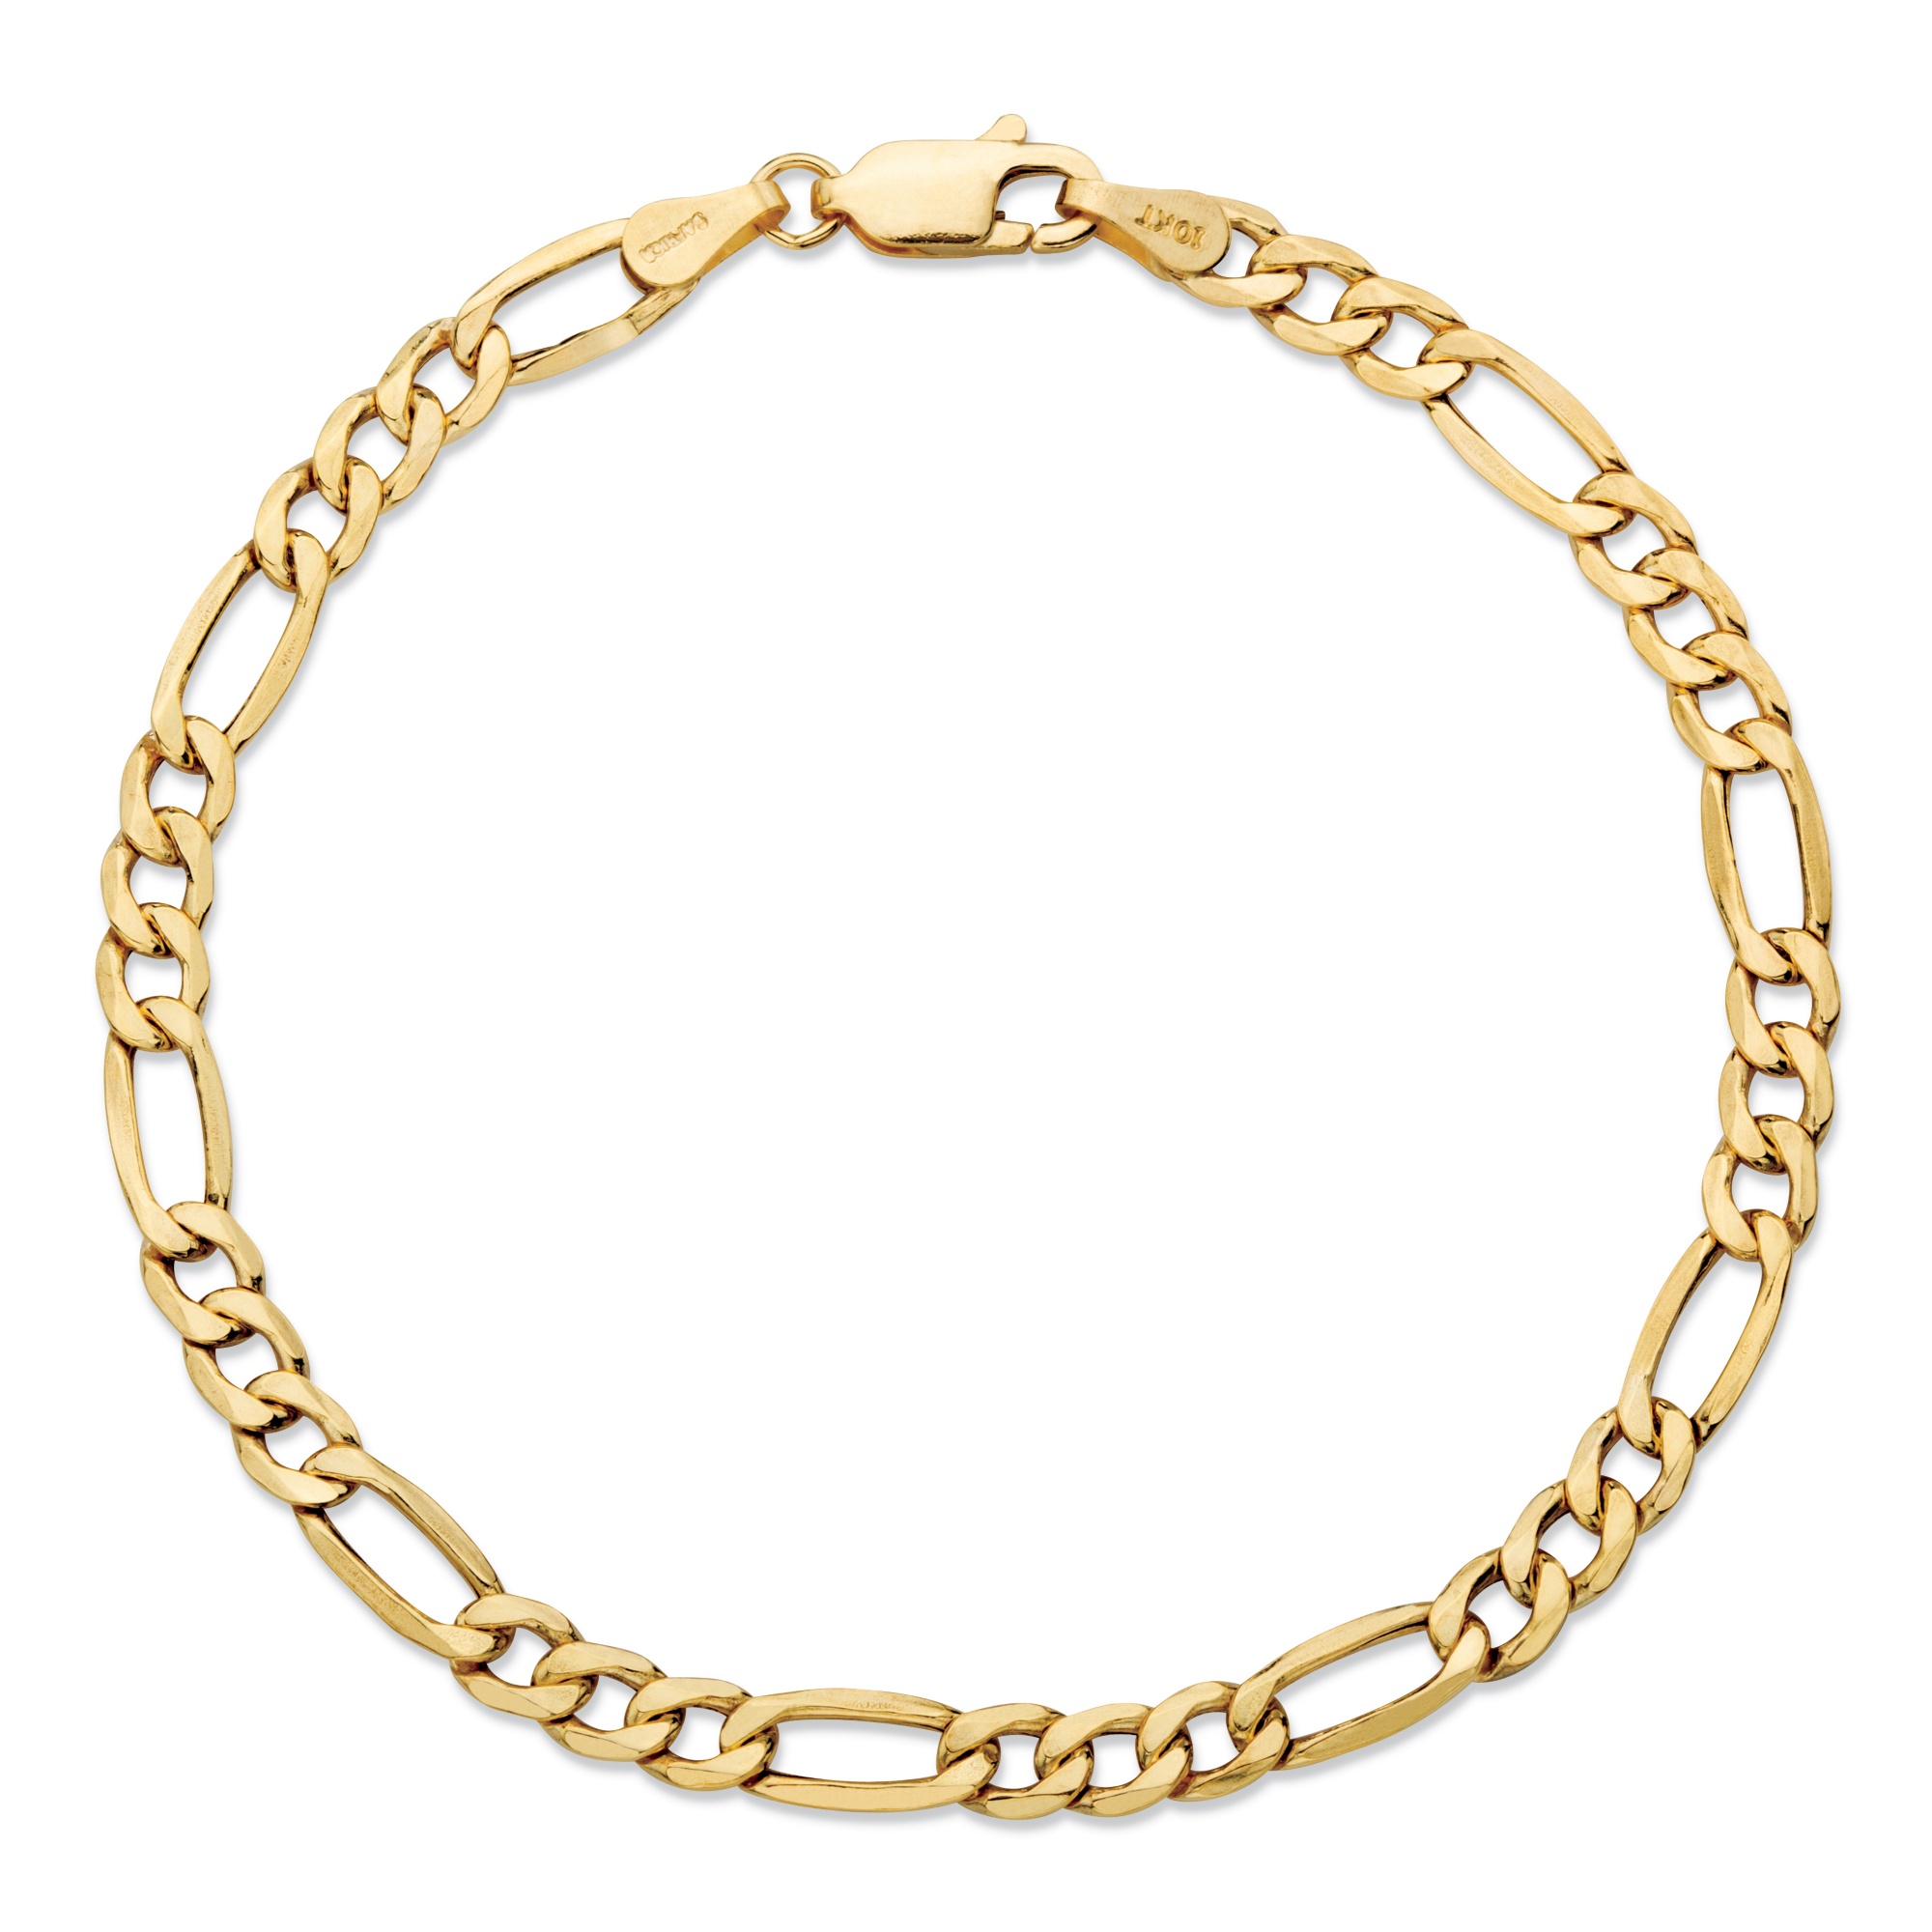 Polished Figaro-Link Chain Bracelet in Solid 10k Yellow Gold 8